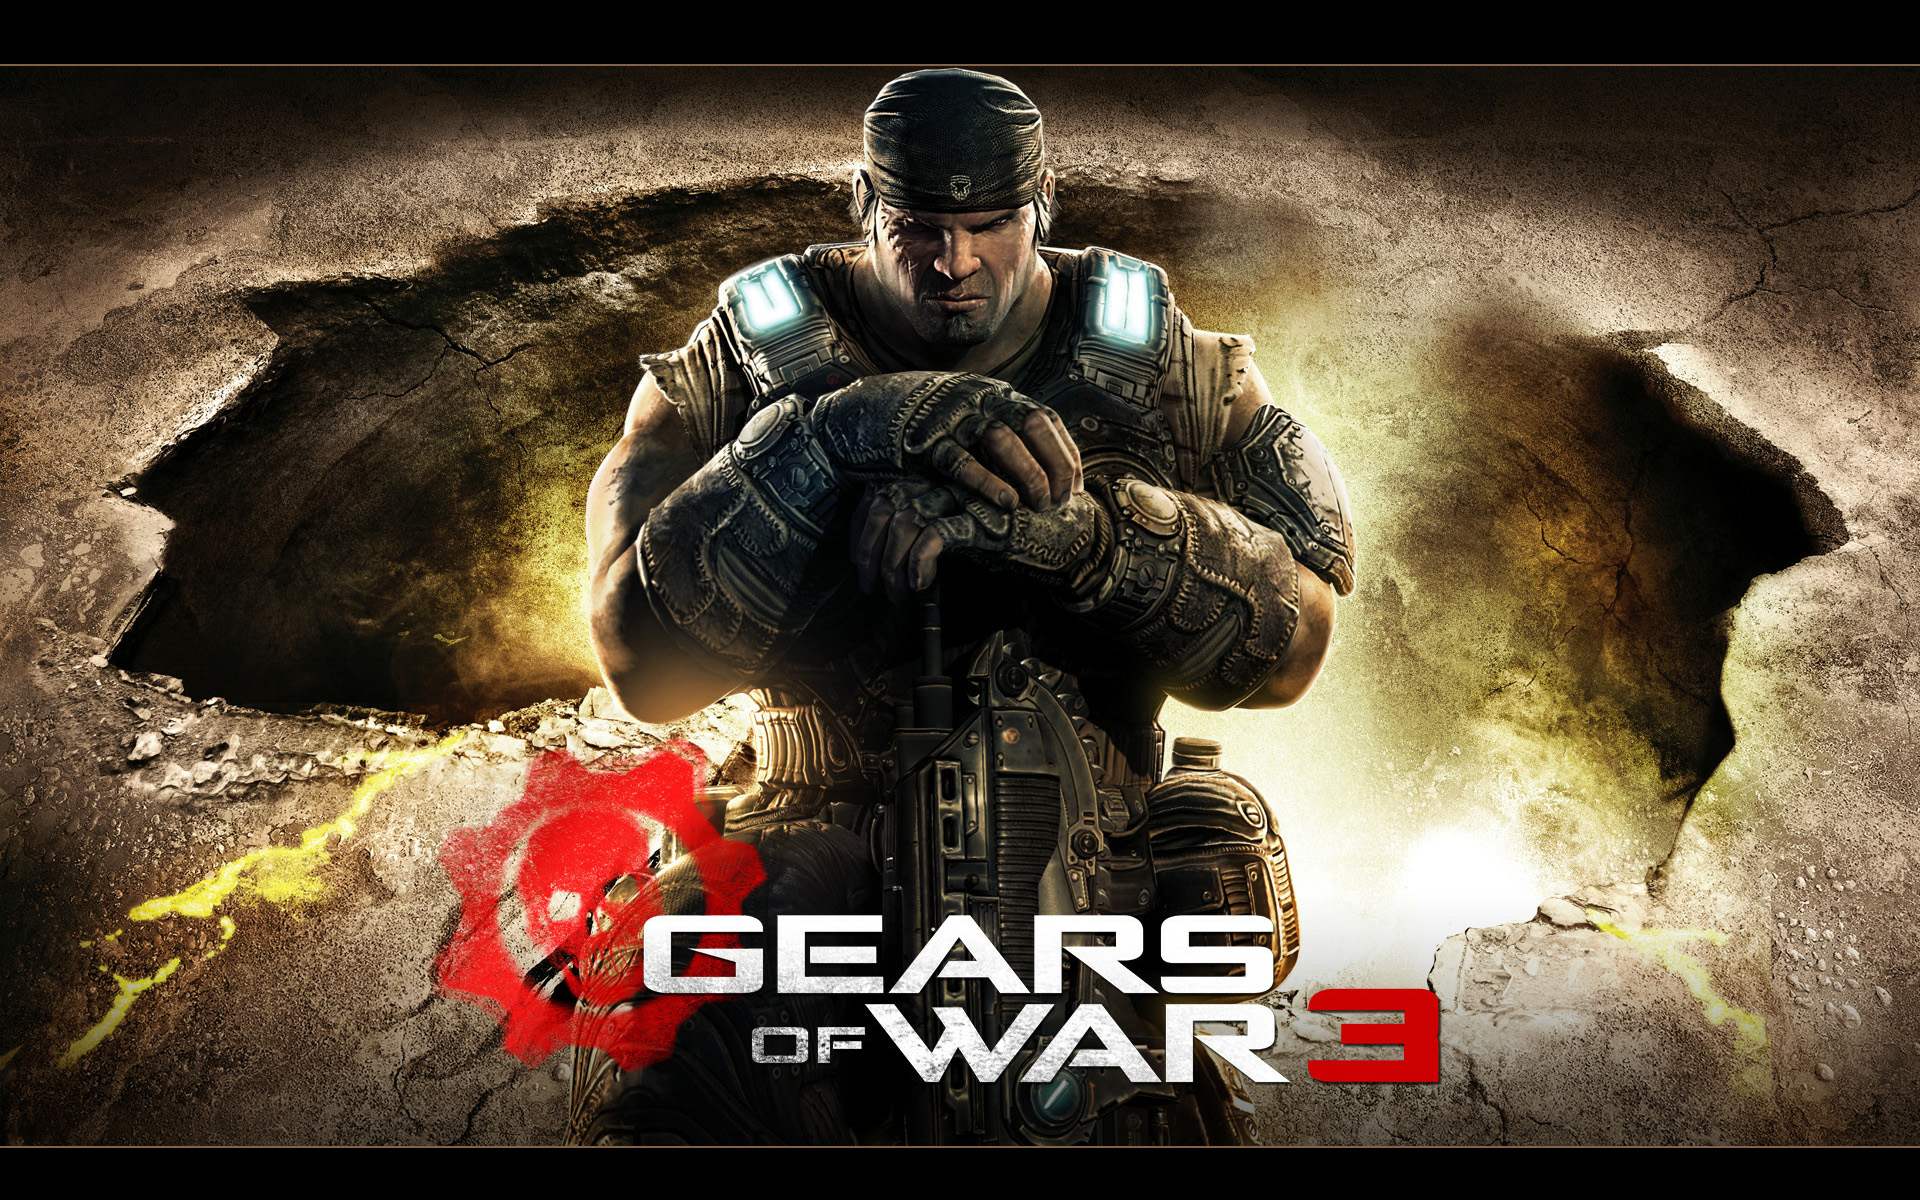 The multiplayer in the past Gears of War games have a reputation of consisting of only hardcore players that roll around decimating the weak with shotguns.